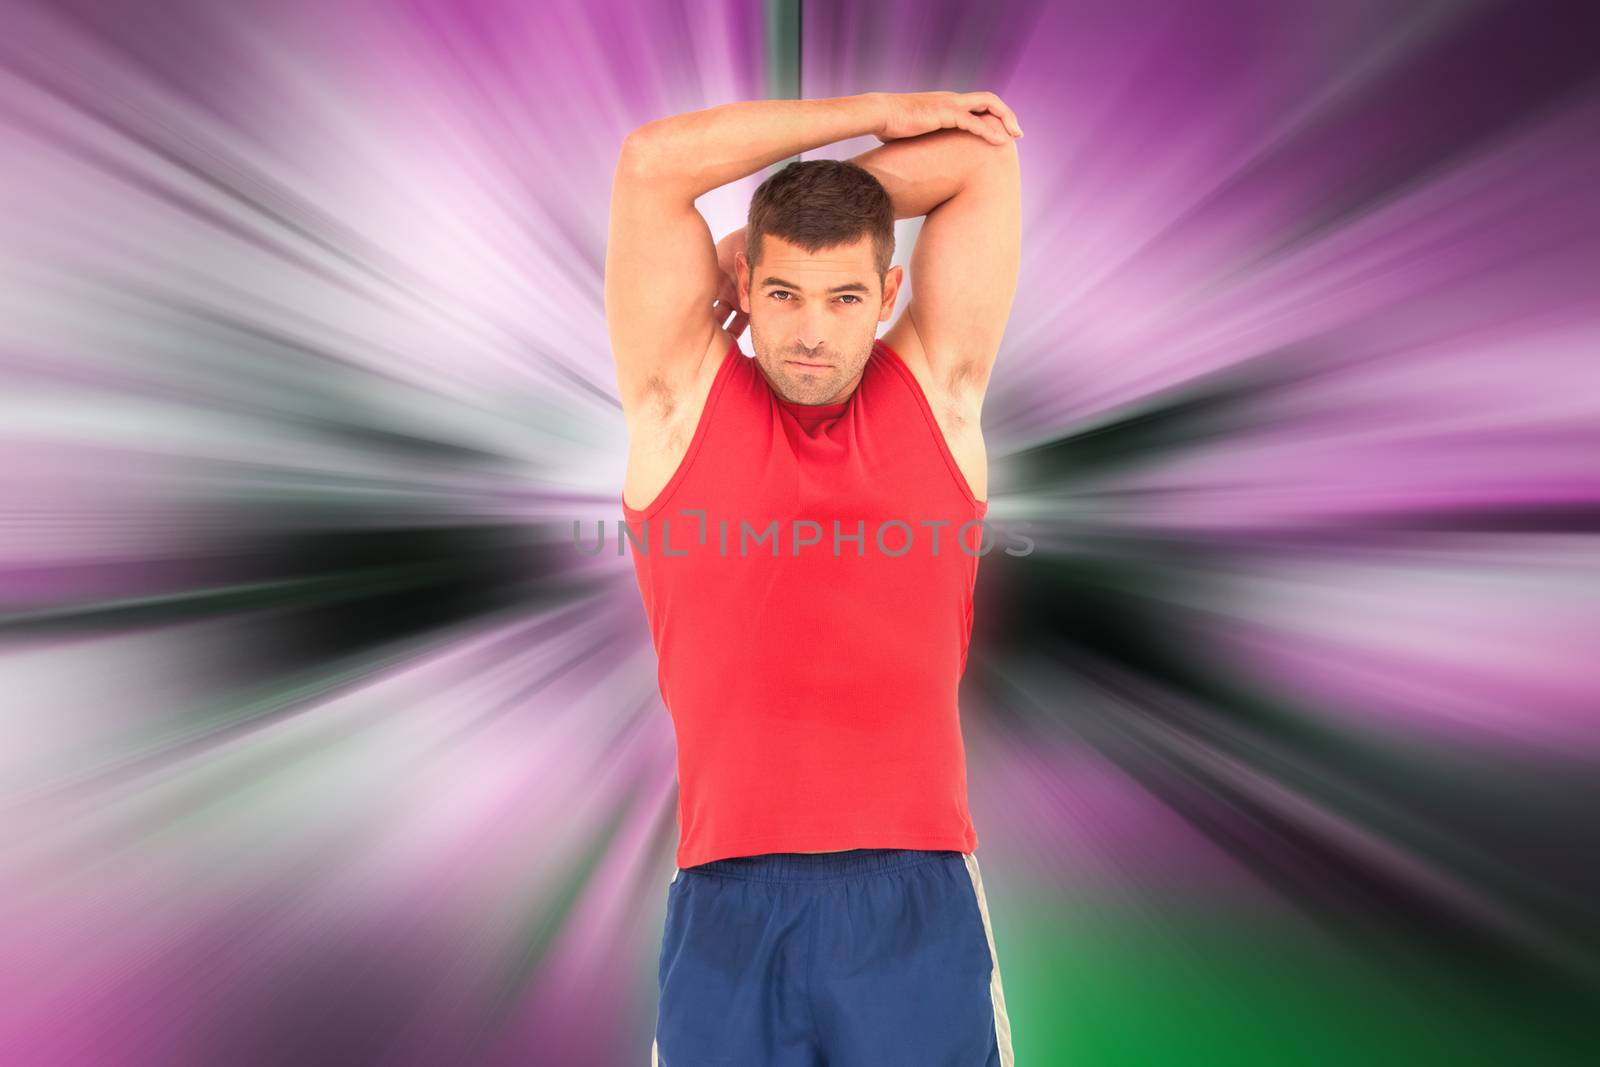 Fit man stretching his arms against abstract background